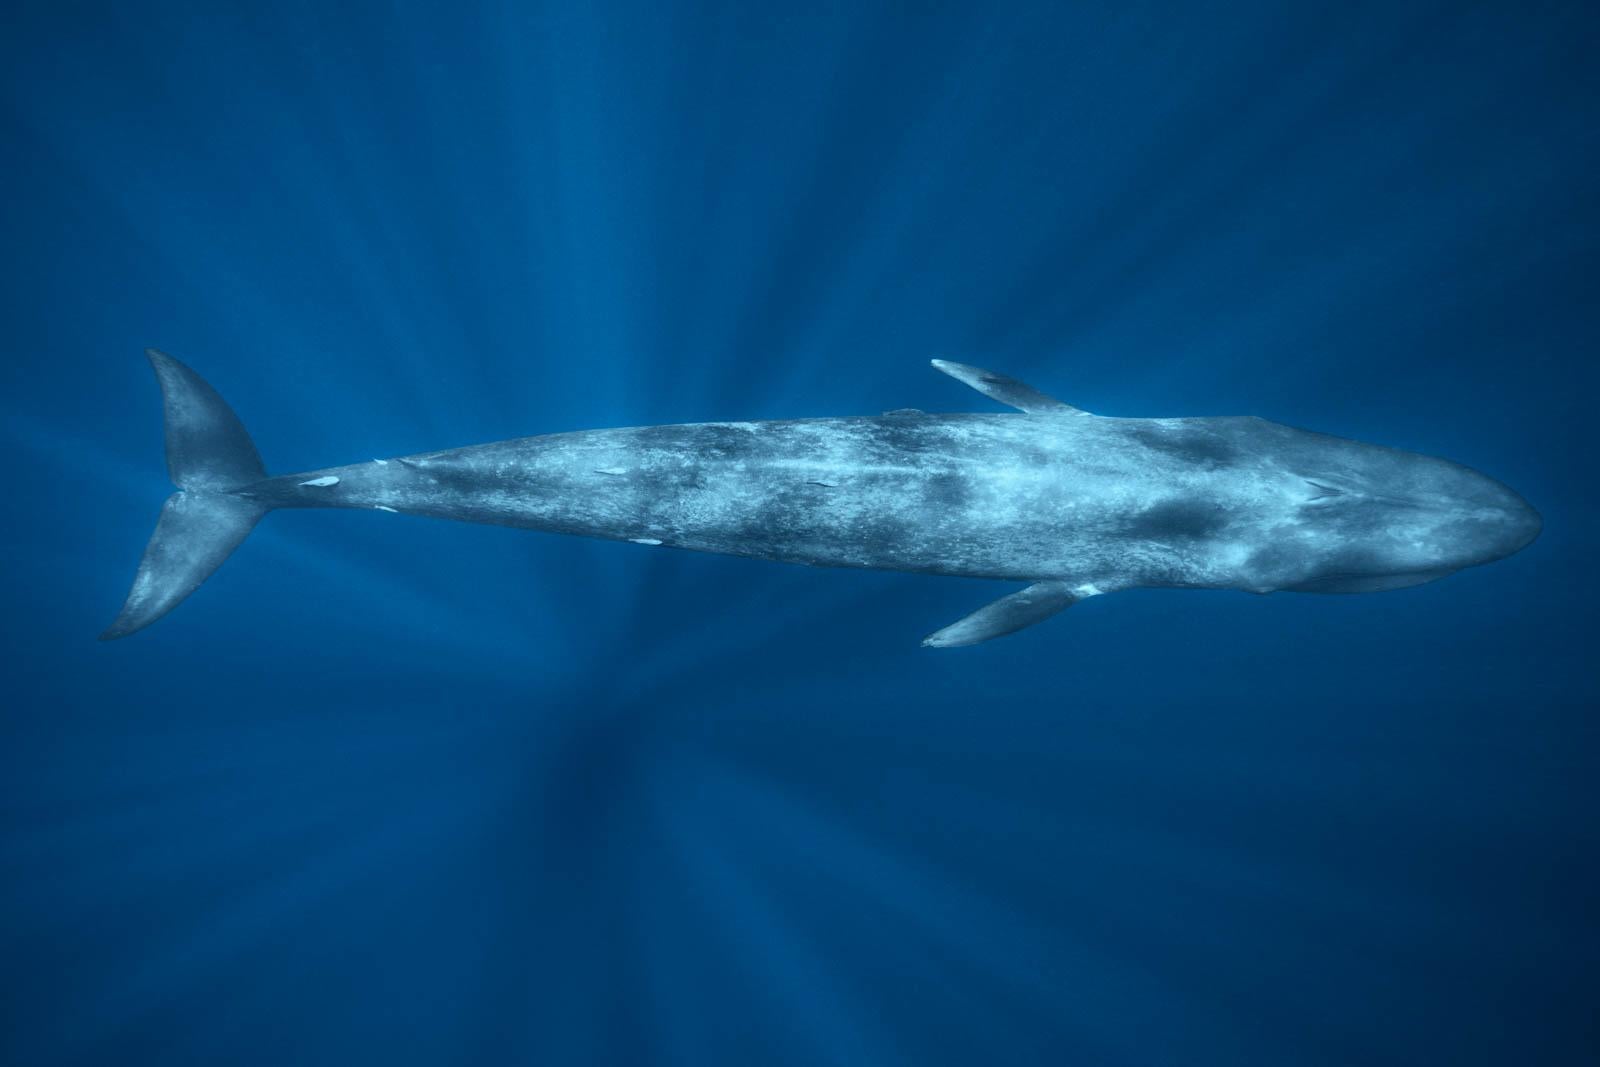 Blue Whale - Signed limited fine art print, Large underwater photo, Contemporary